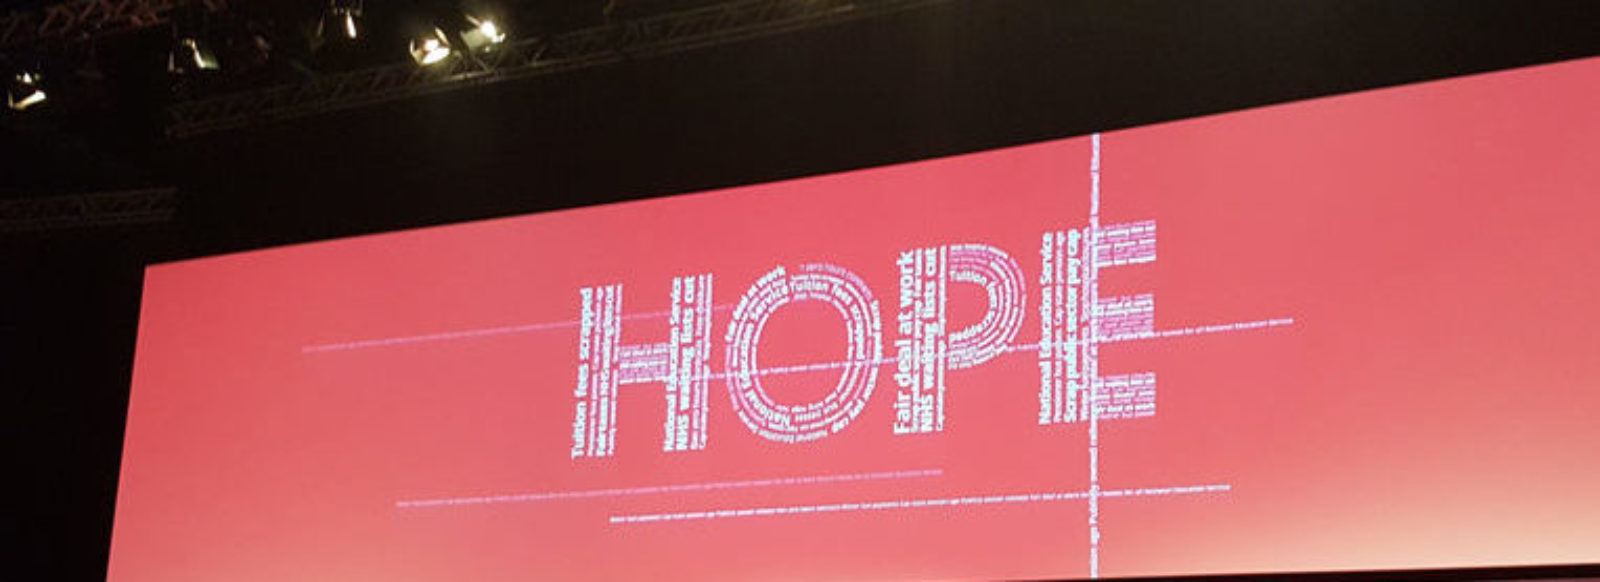 Hope. A key message at this moment.